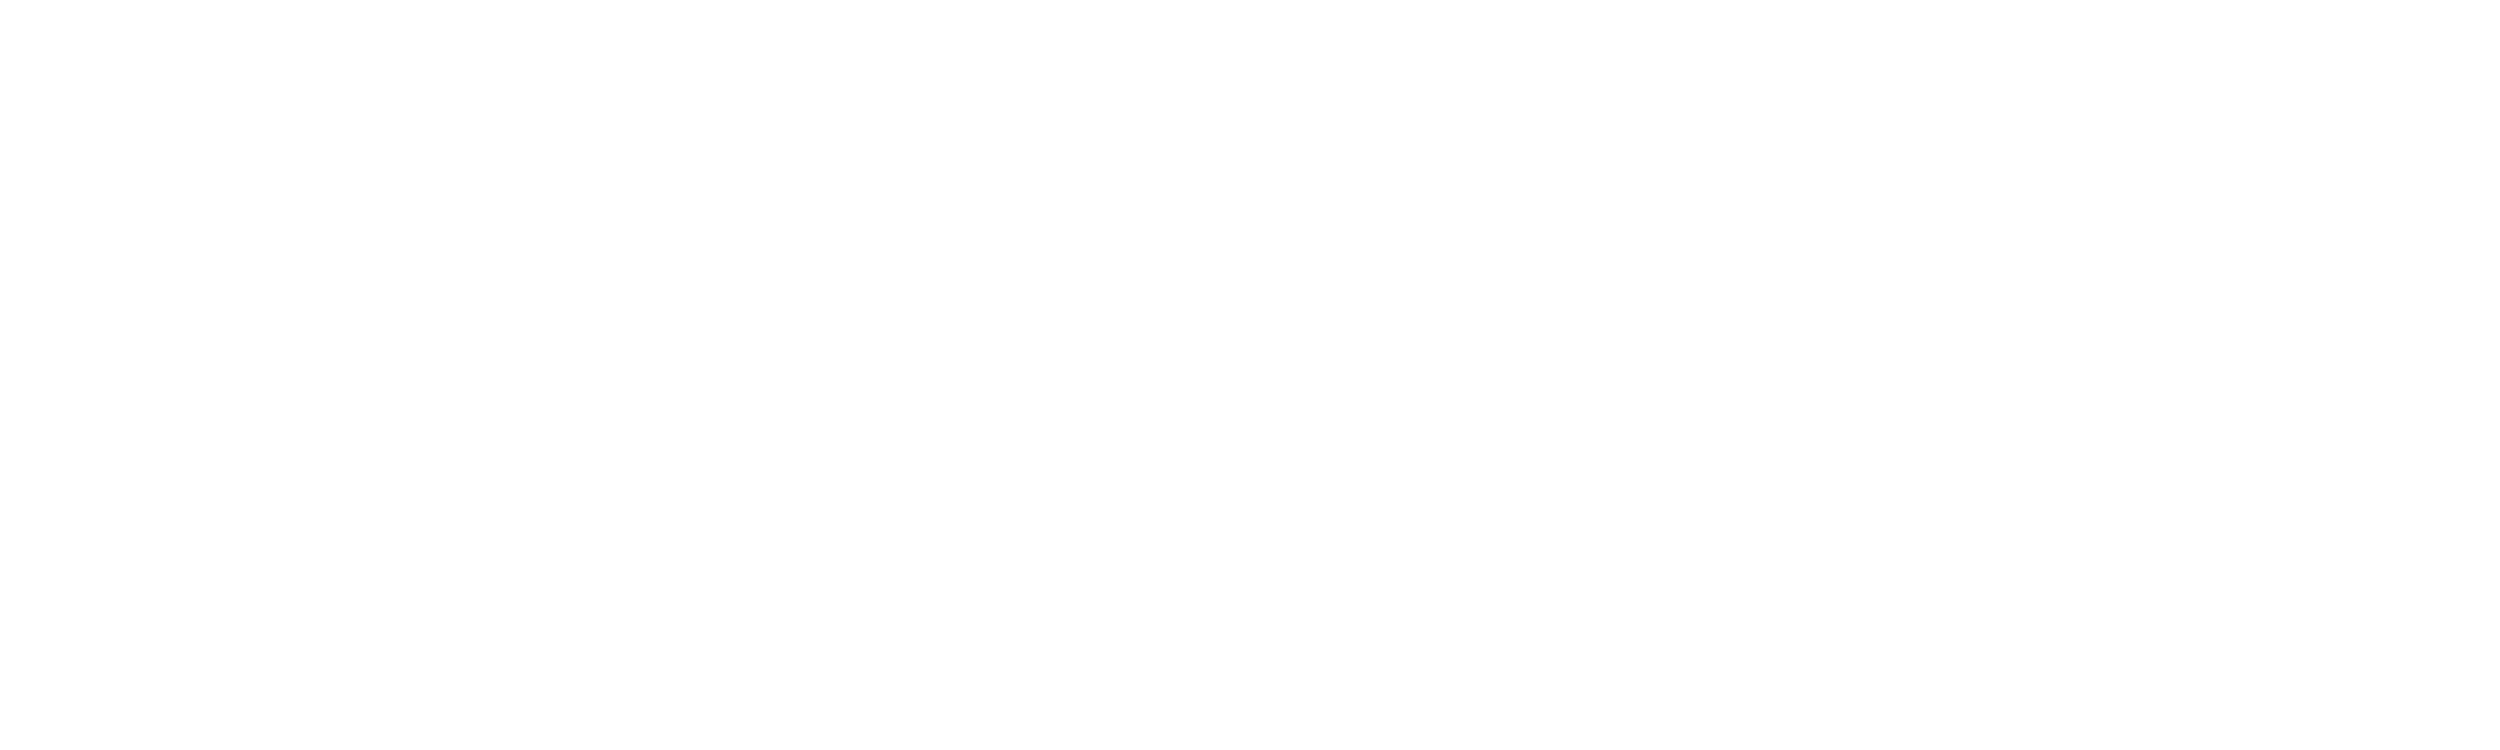 Fast Horse Photography - St. Augustine, Florida